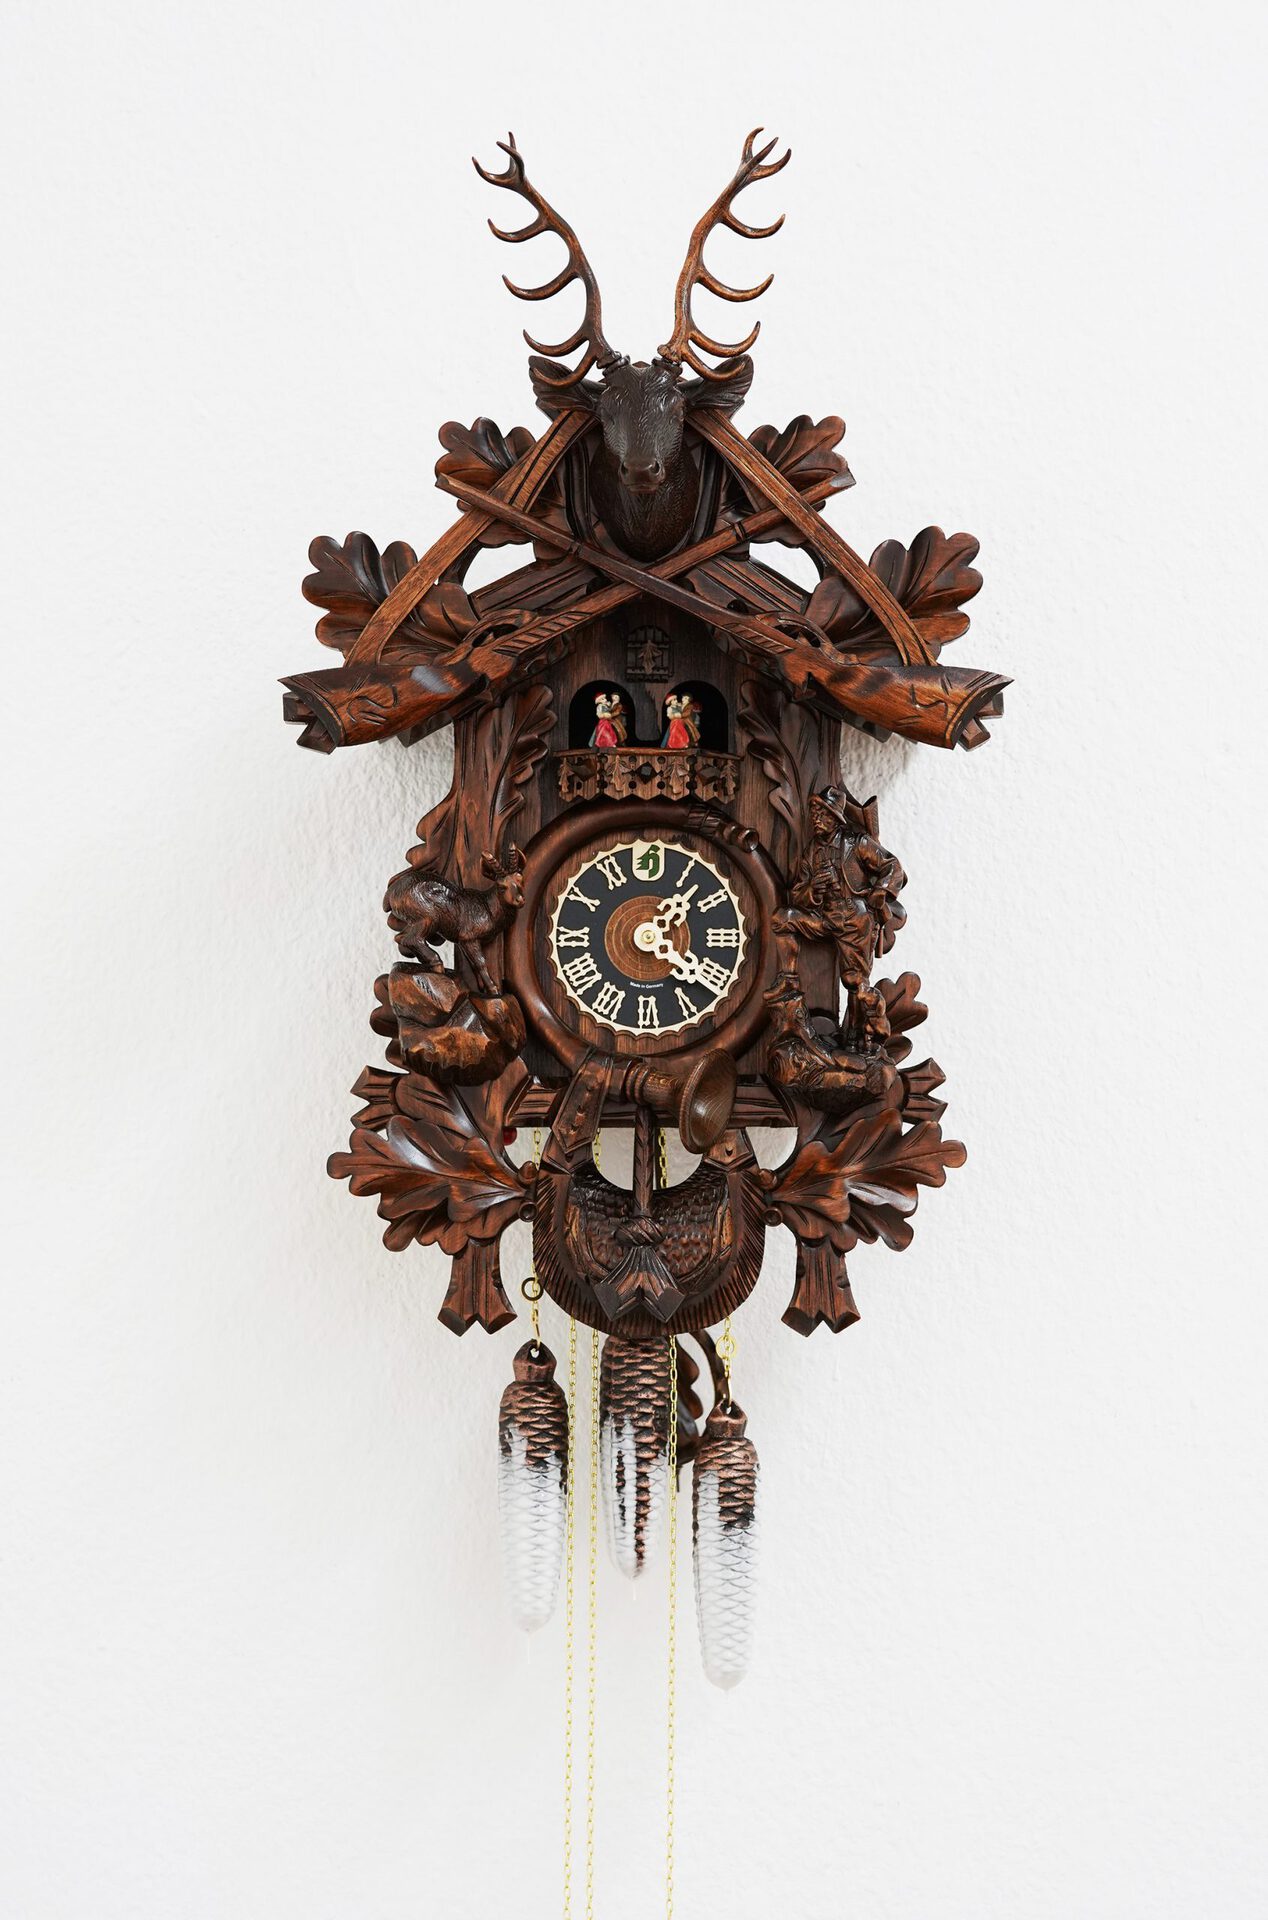 Eliza Ballesteros, CUCKOO CLOCK, 2020, carved and varnished wood, latex, 75 x 38 x 25 cm